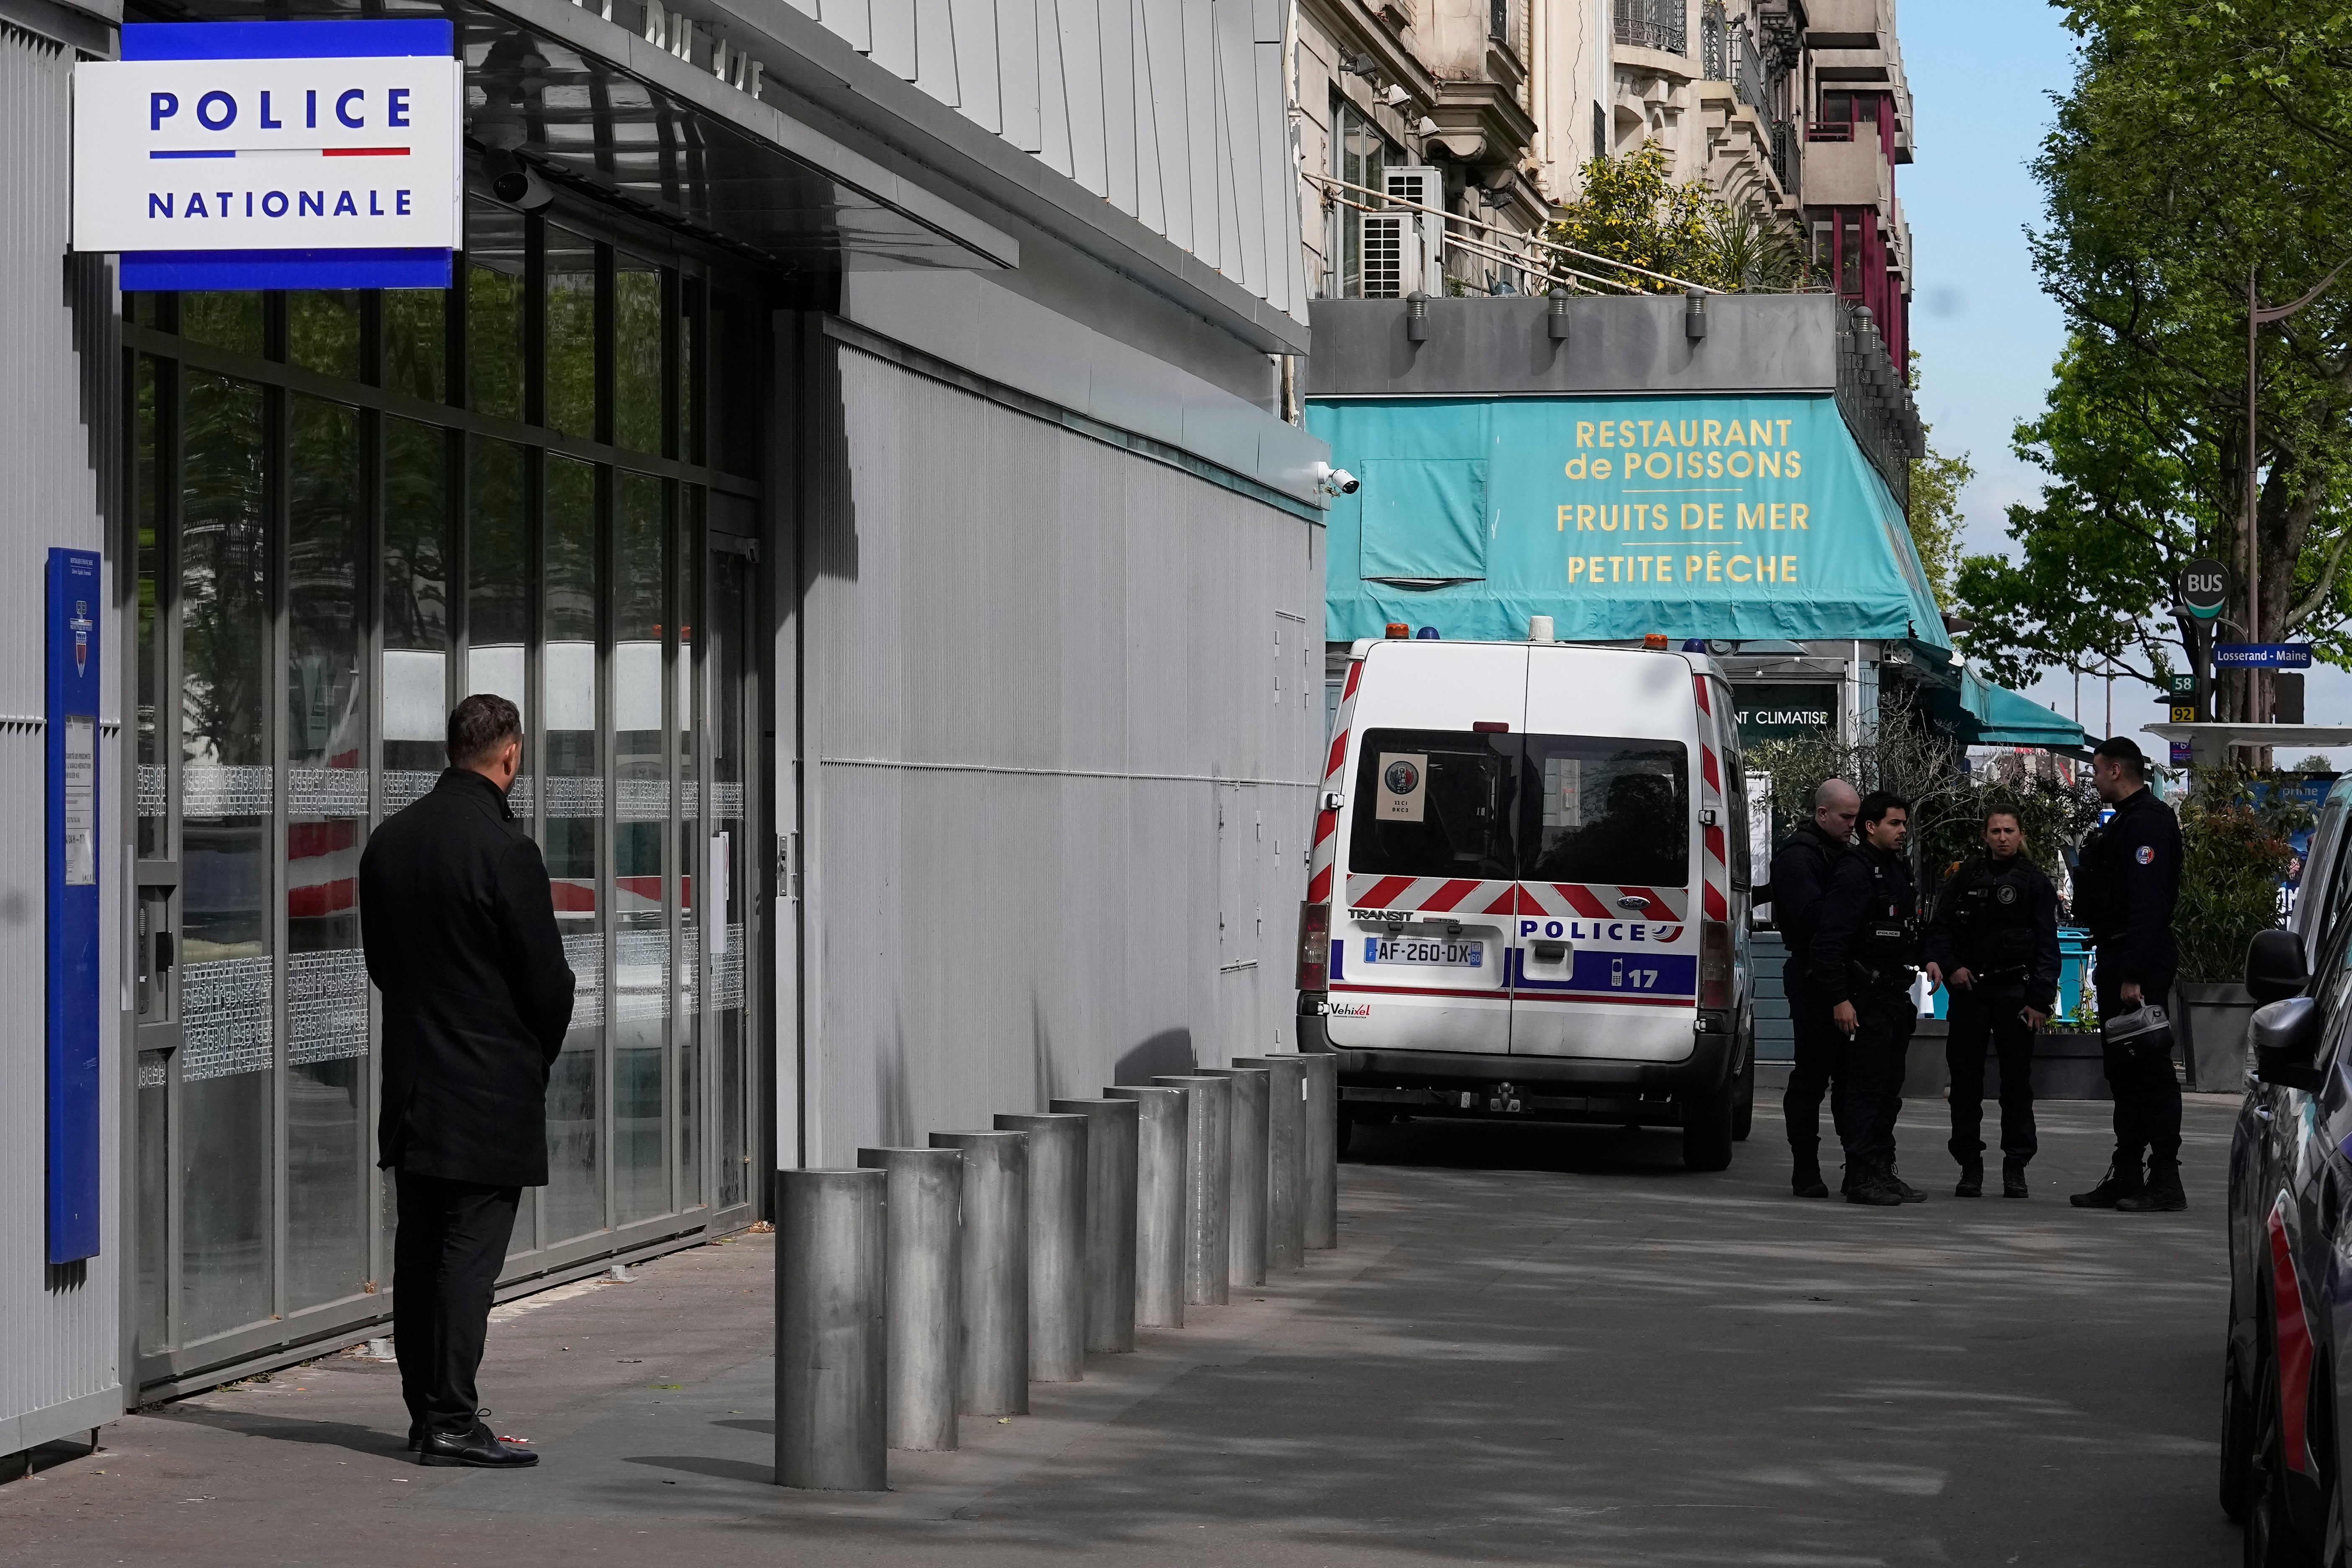 Police officers stand outside the police station where French actor Gerard Depardieu is expected to be questioned